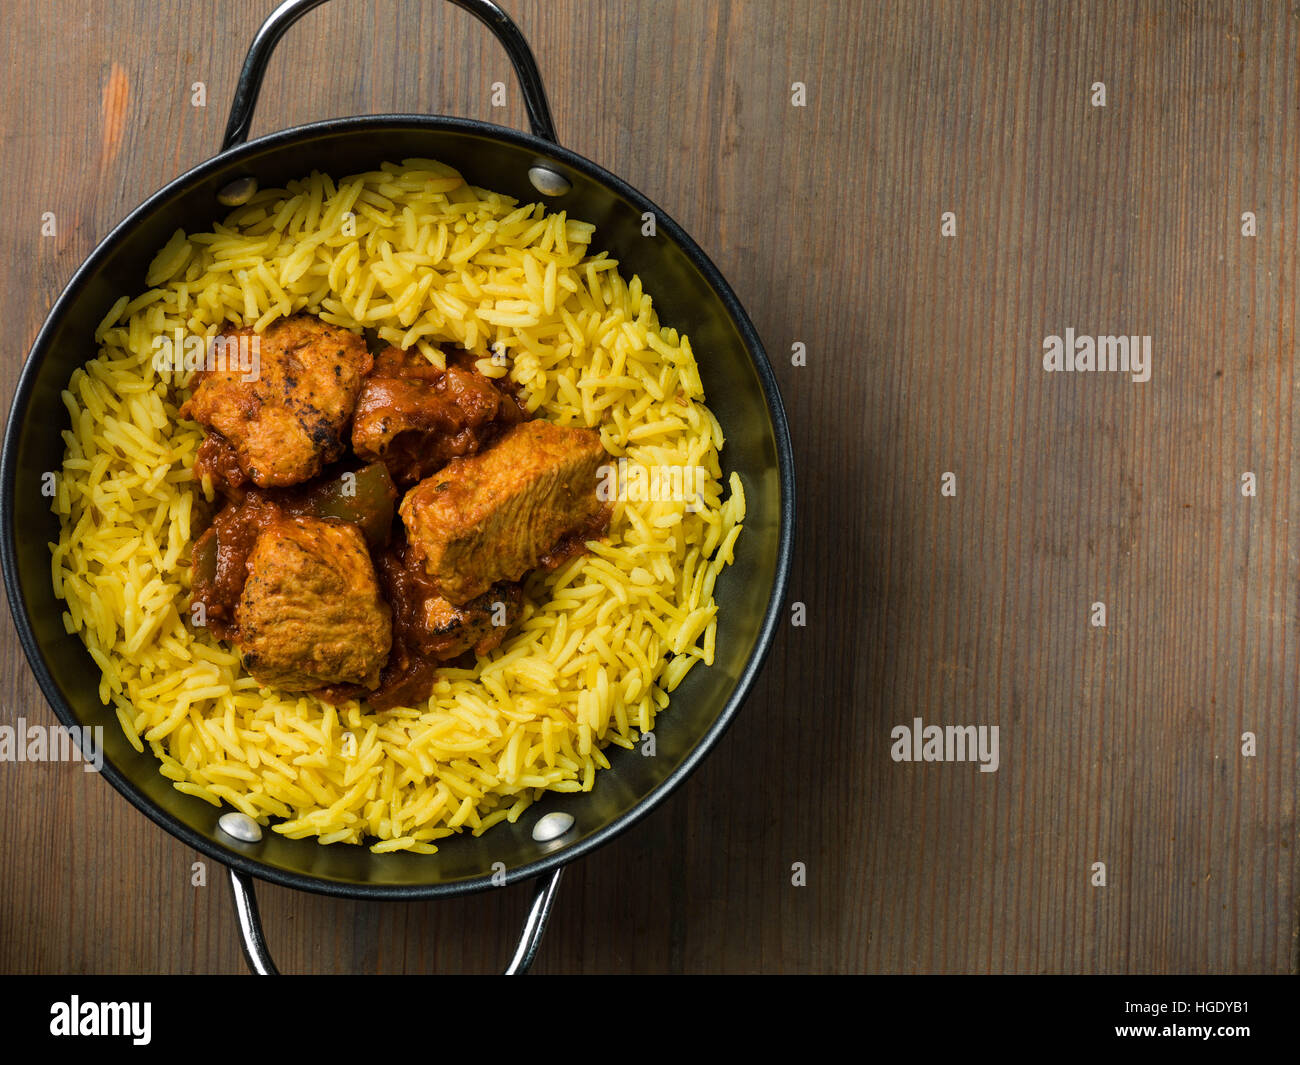 Freshly Cooked Authentic Indian Style Spicy Chicken Jalfrezi Curry Served With Yellow Pilau Rice Meal With No People And Flat Lay Composition Stock Photo